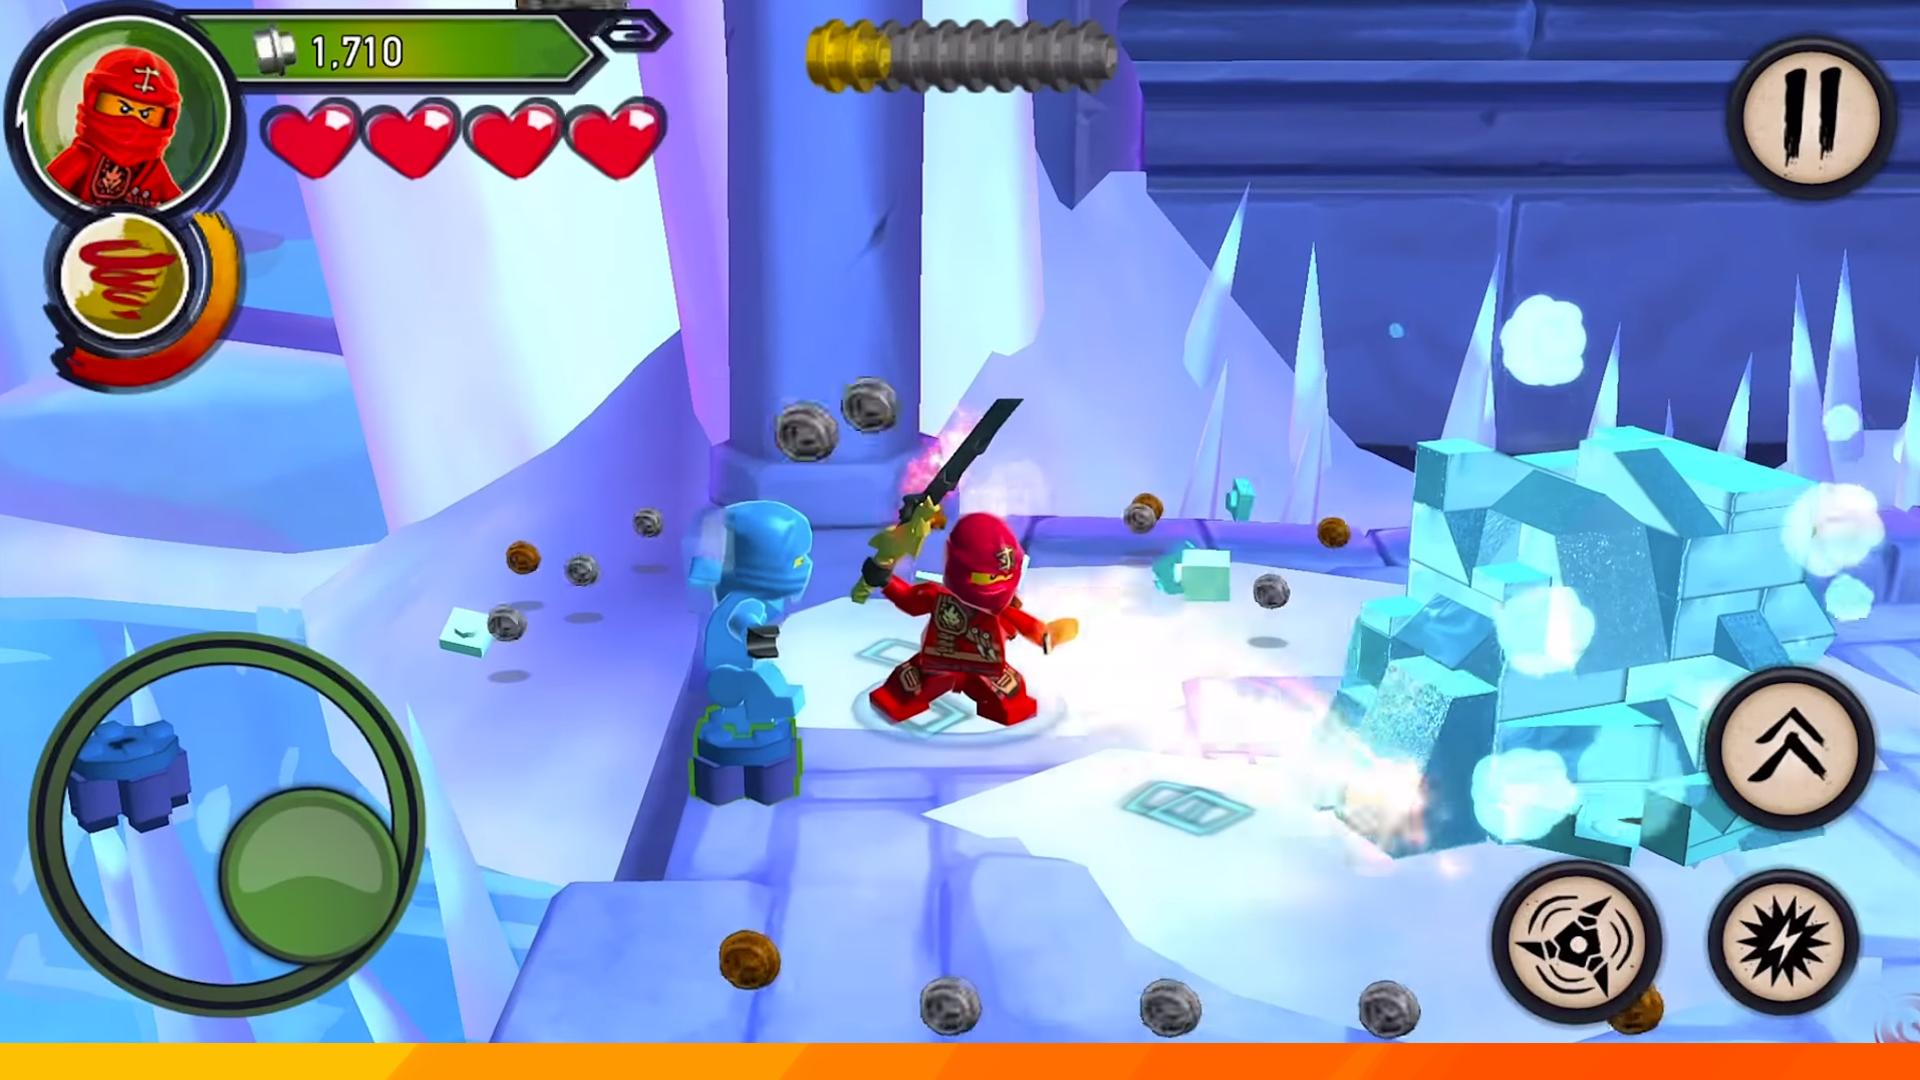 TopPro LEGO Ninjago Shadow of Ronin For Guide for Android - APK Download